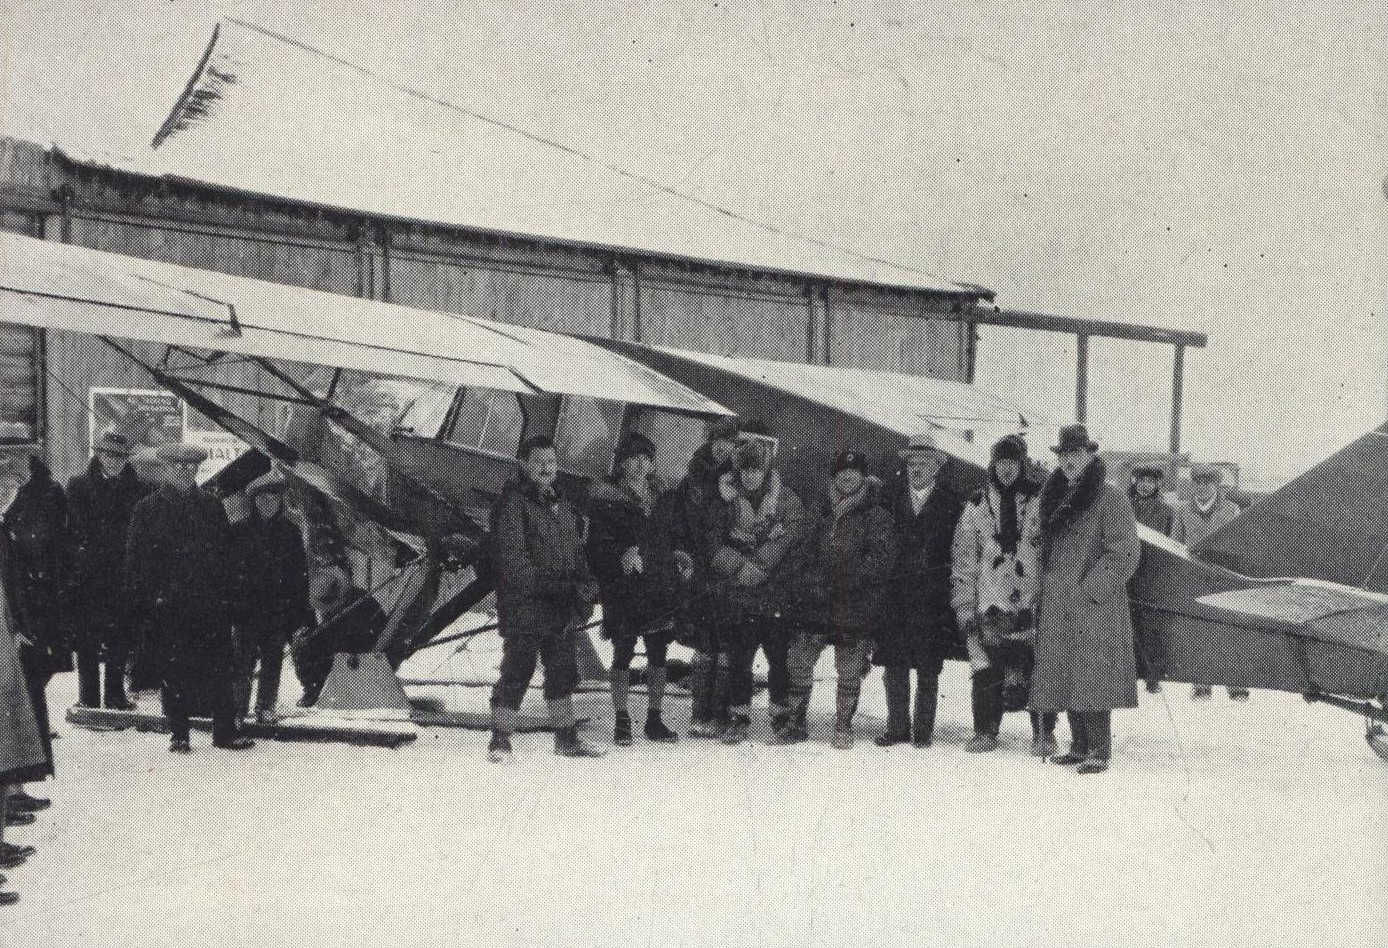 Group of men standing in front of plane on skis